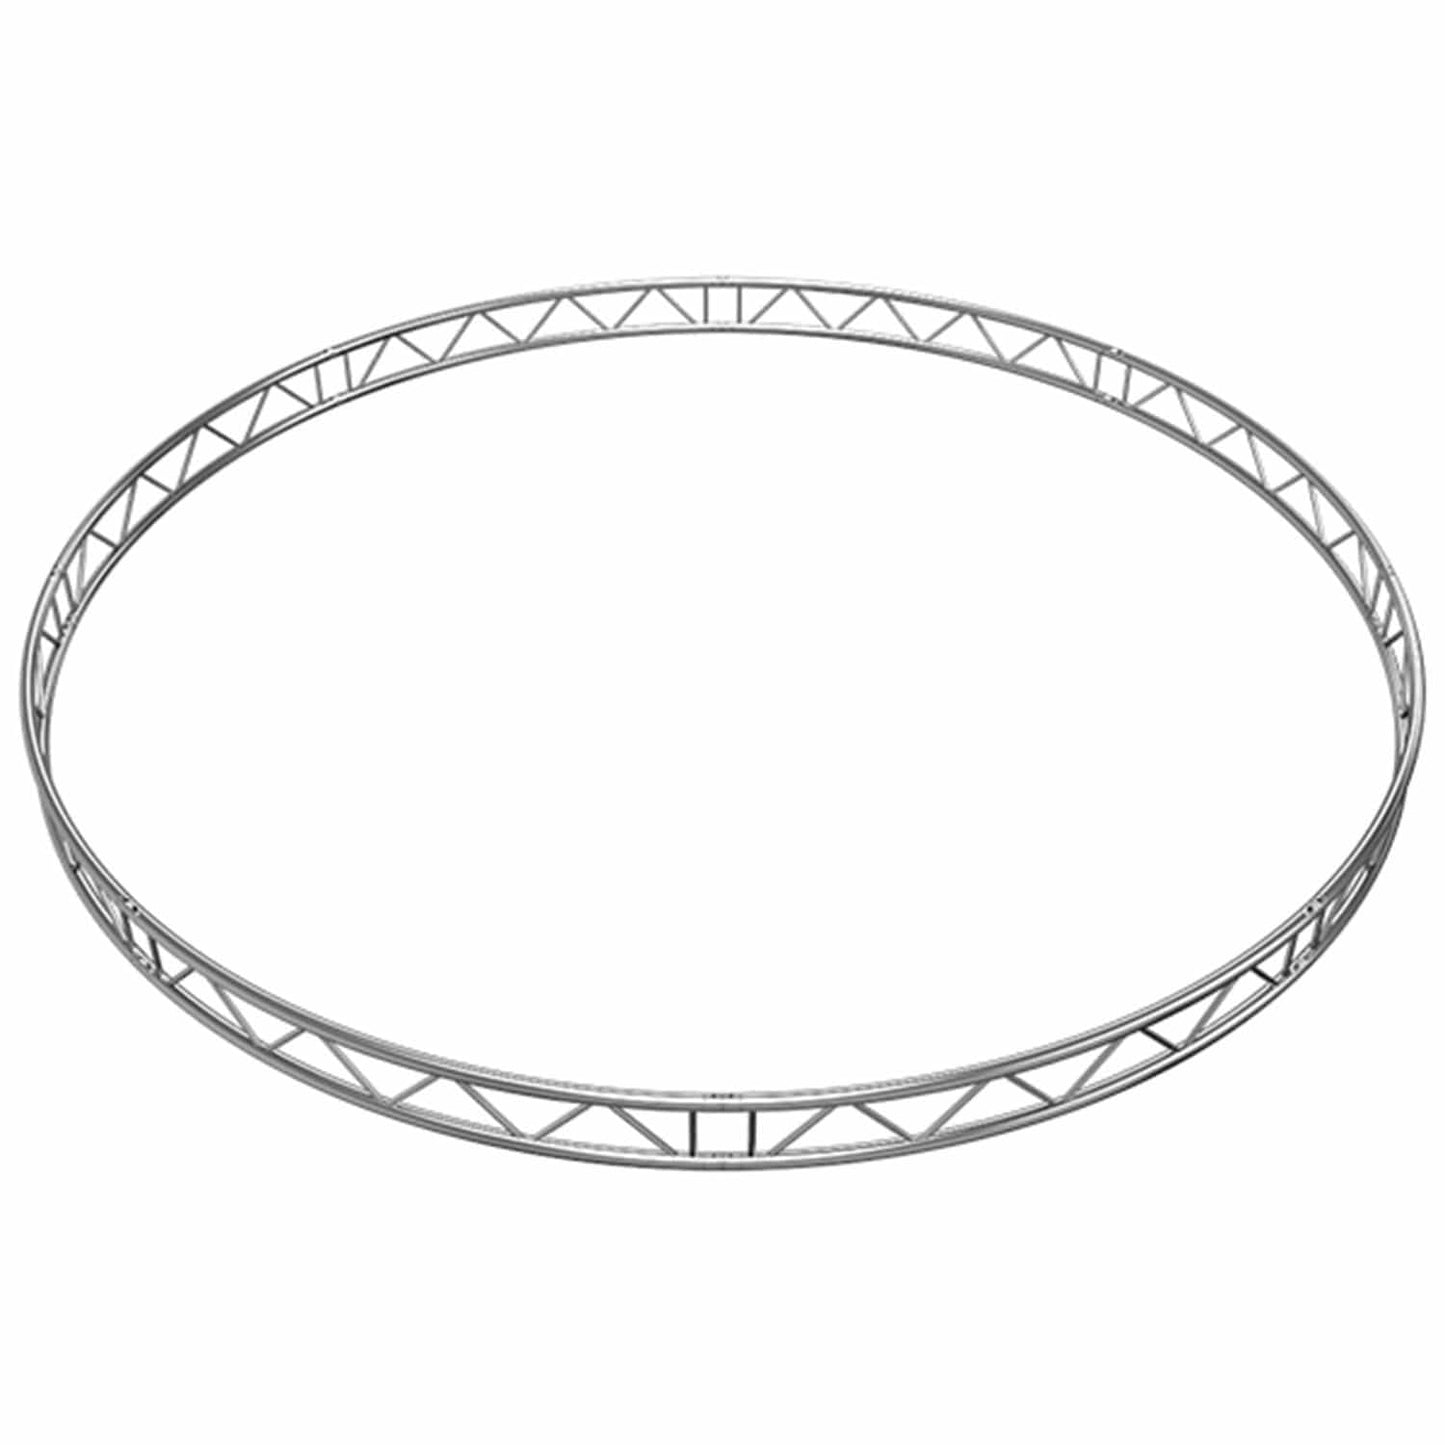 Global Truss IB-C6-V45 6.0M Vertical I-Beam Truss Circle - PSSL ProSound and Stage Lighting